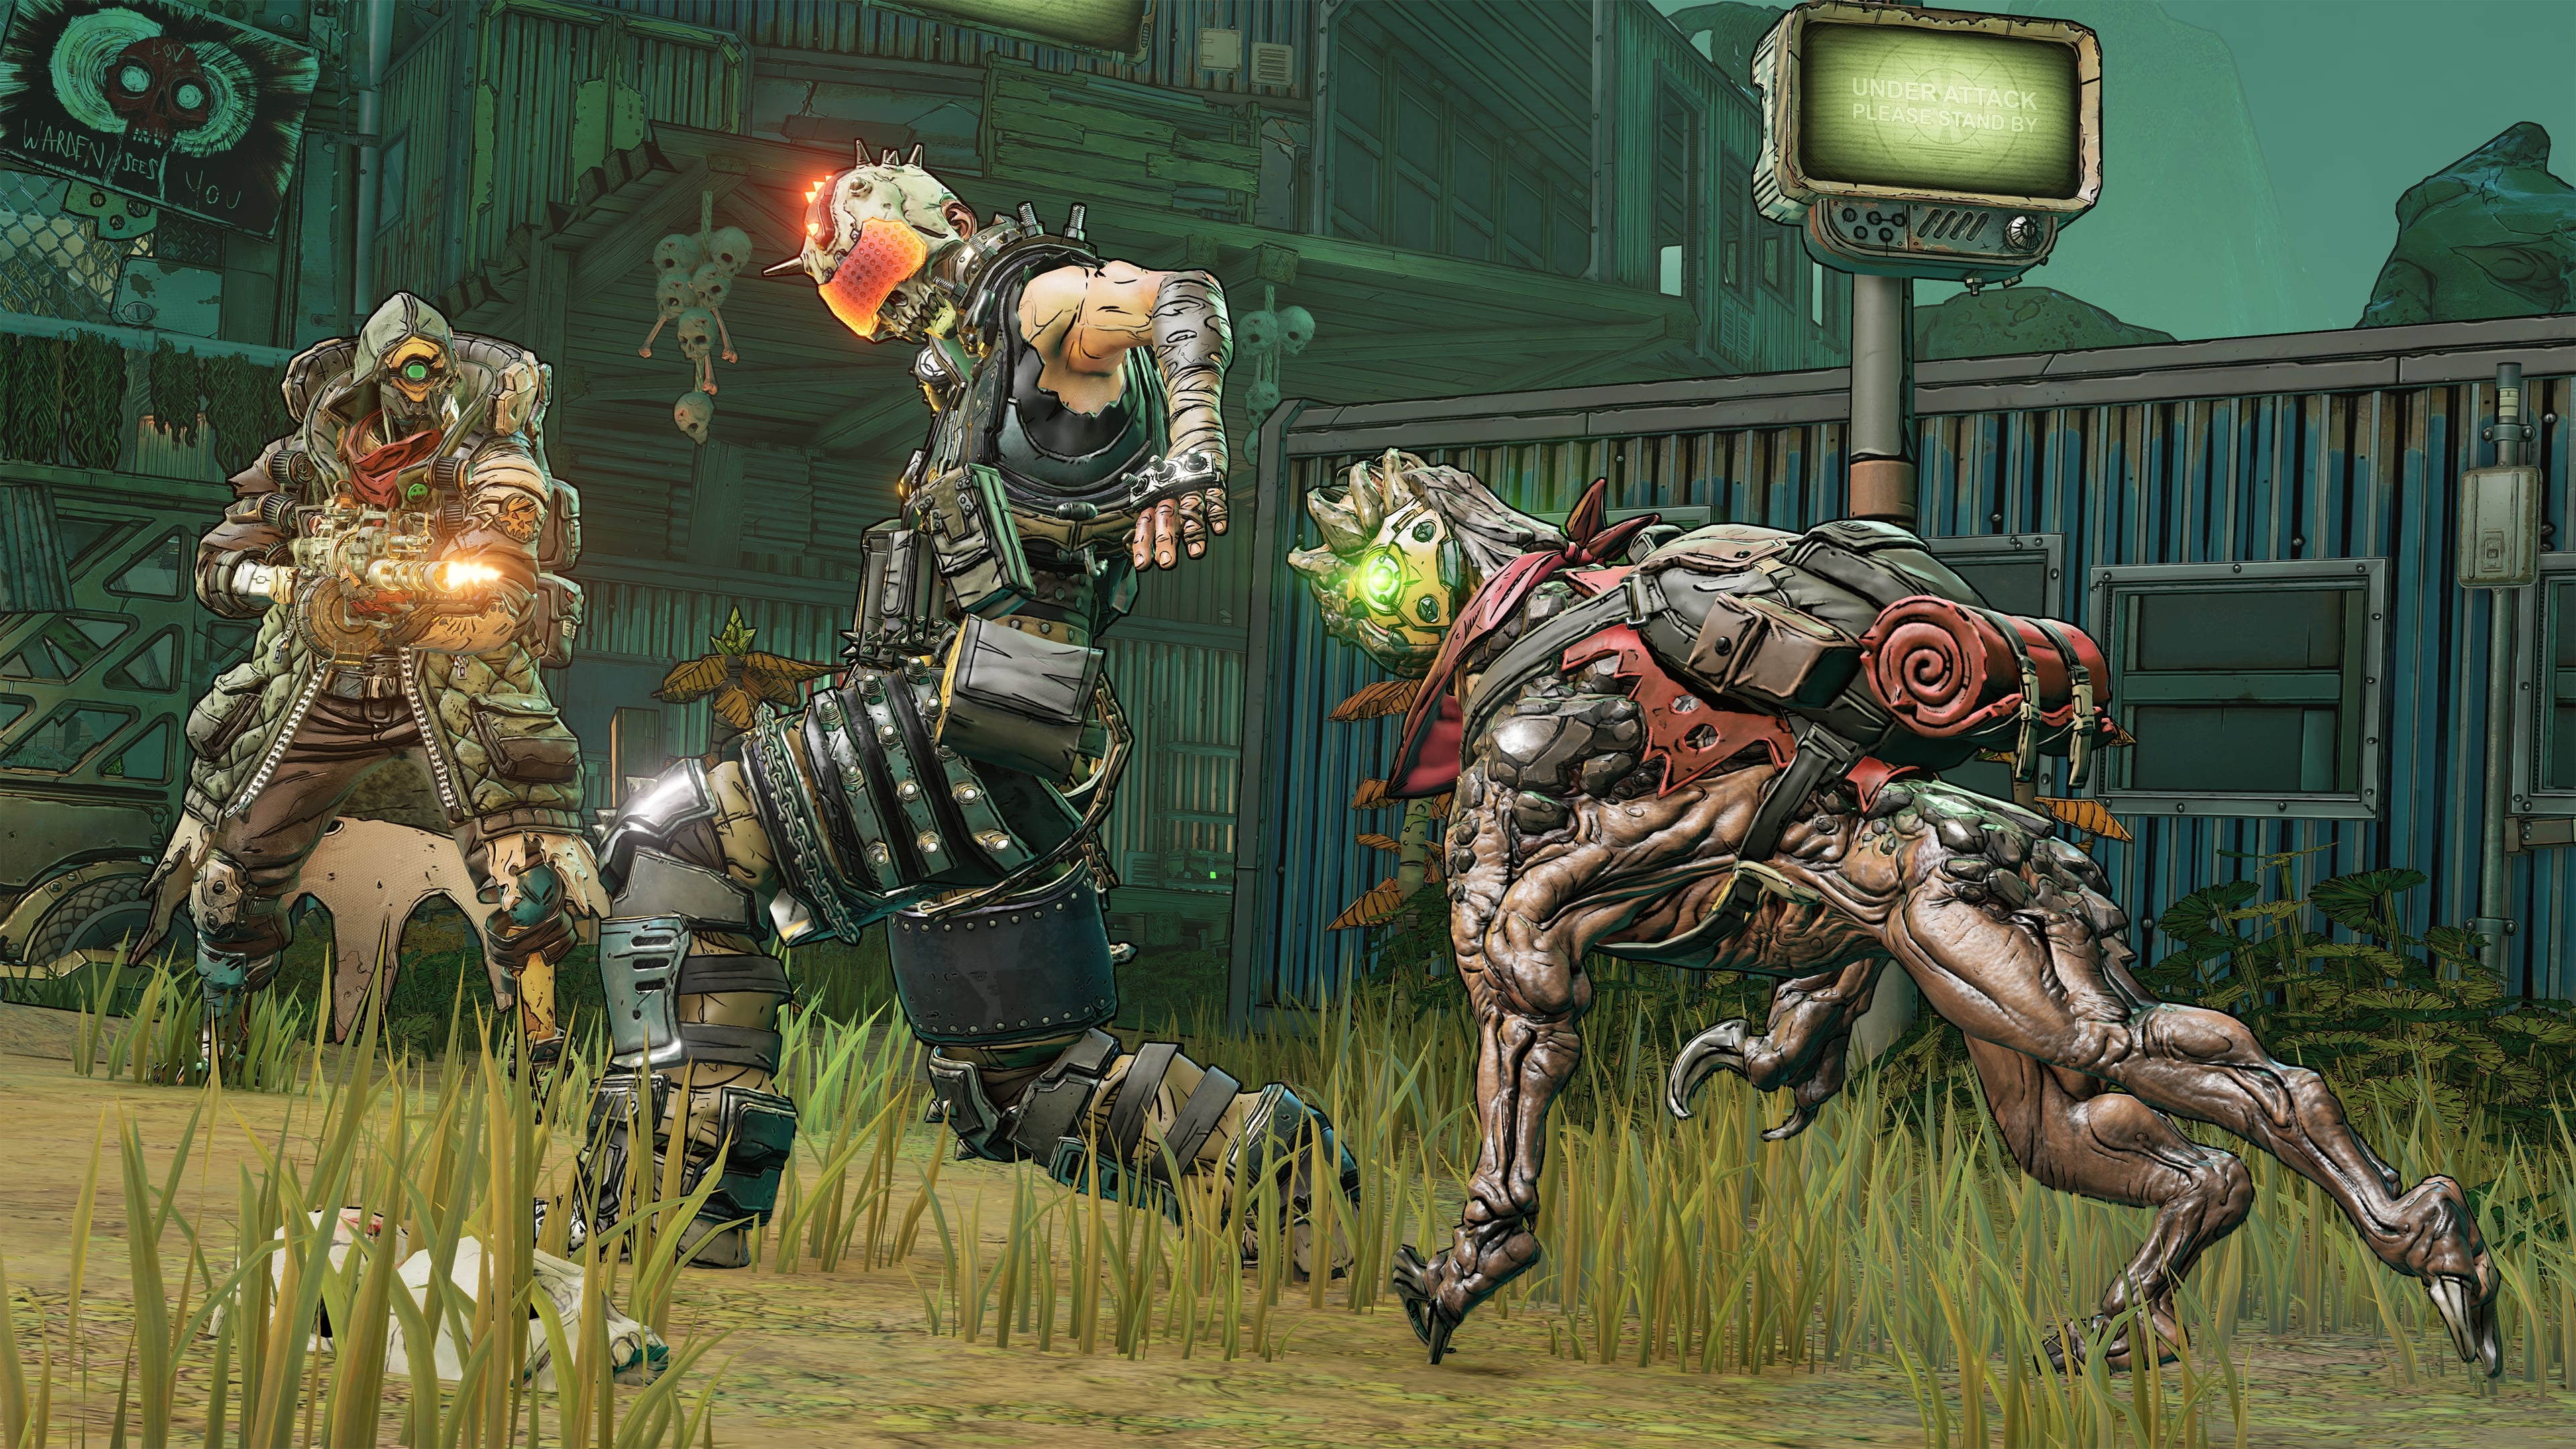 Borderlands download size revealed, and it out bazillions of guns don't take up too much memory | GamesRadar+